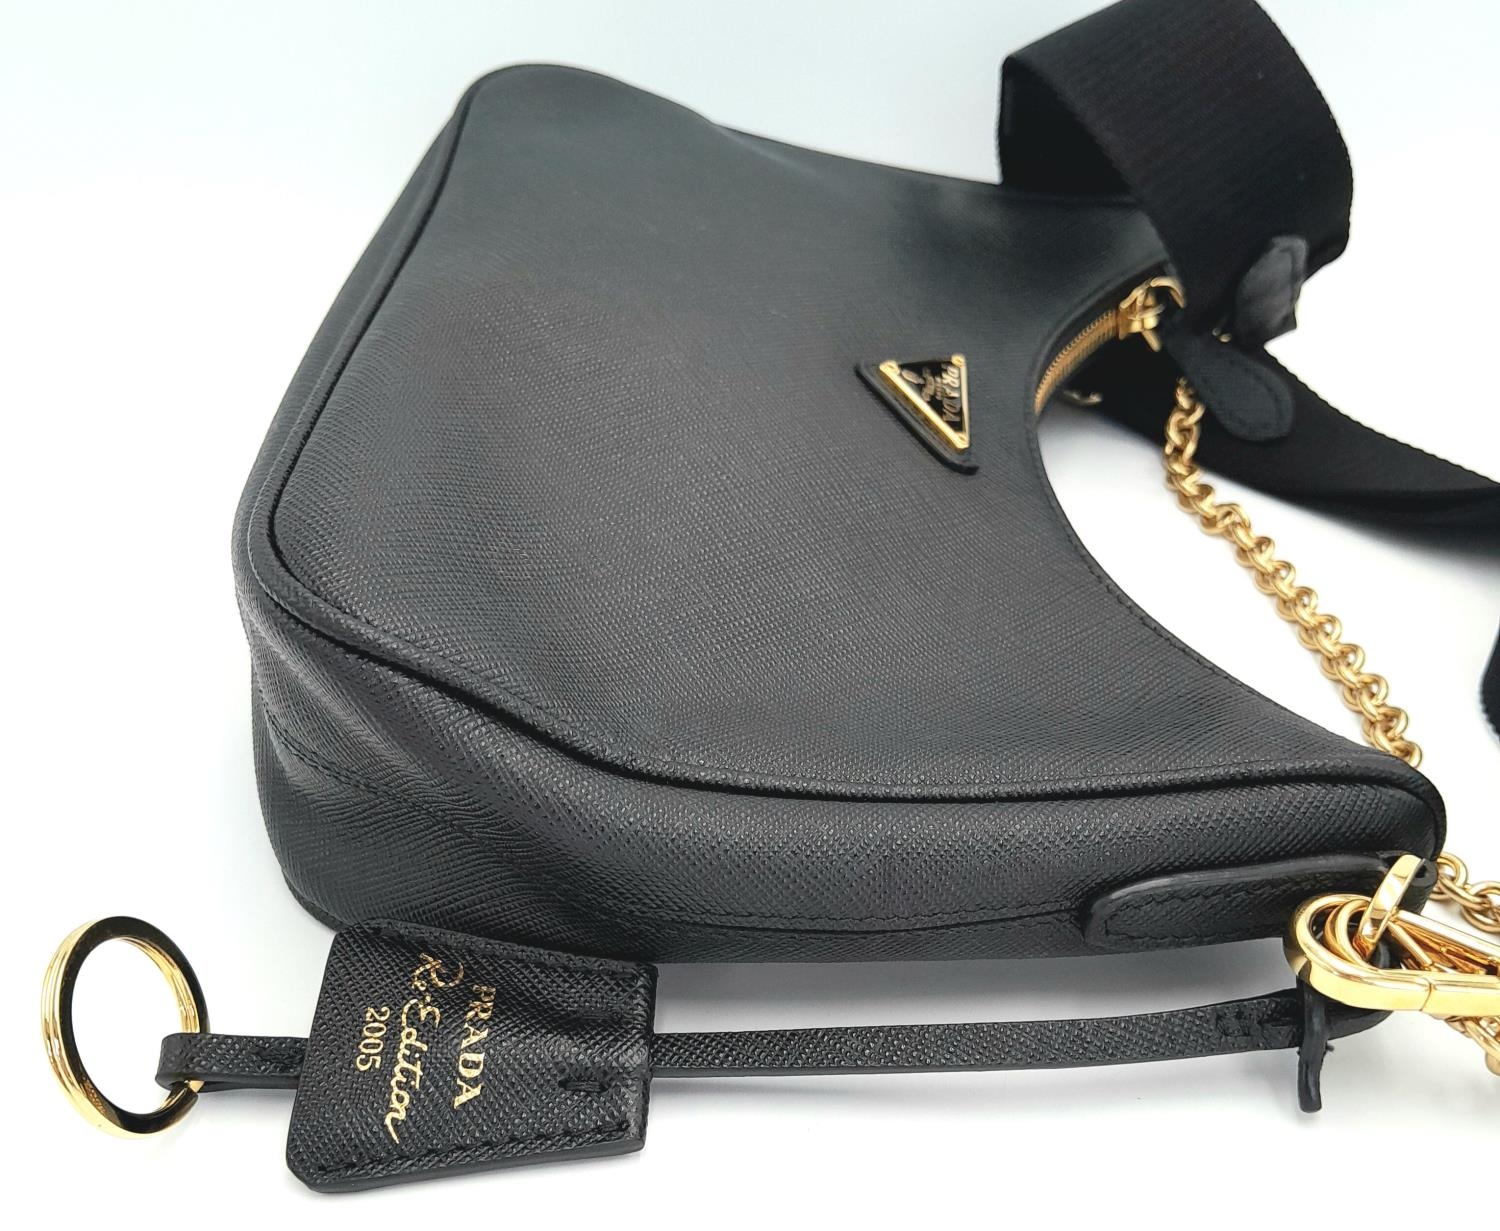 A Prada Black Re-Edition 2005 Bag. Saffiano leather exterior with gold-toned hardware, zip top - Image 4 of 15